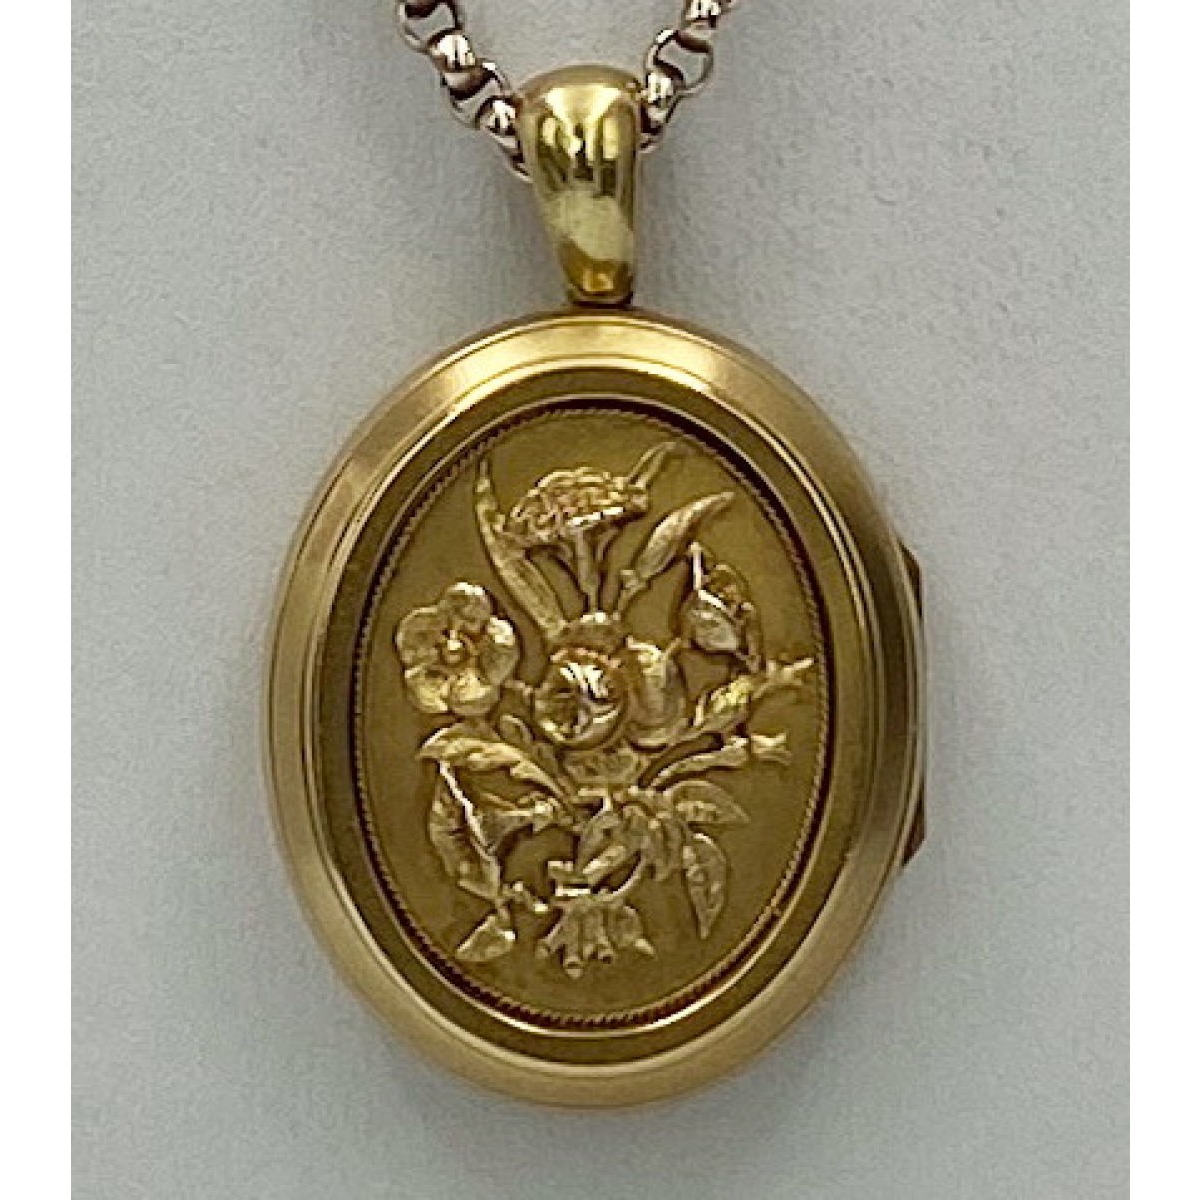 Highly Unusual 15 karat Gold Antique English Locket with Applied Bouquet of Flowers